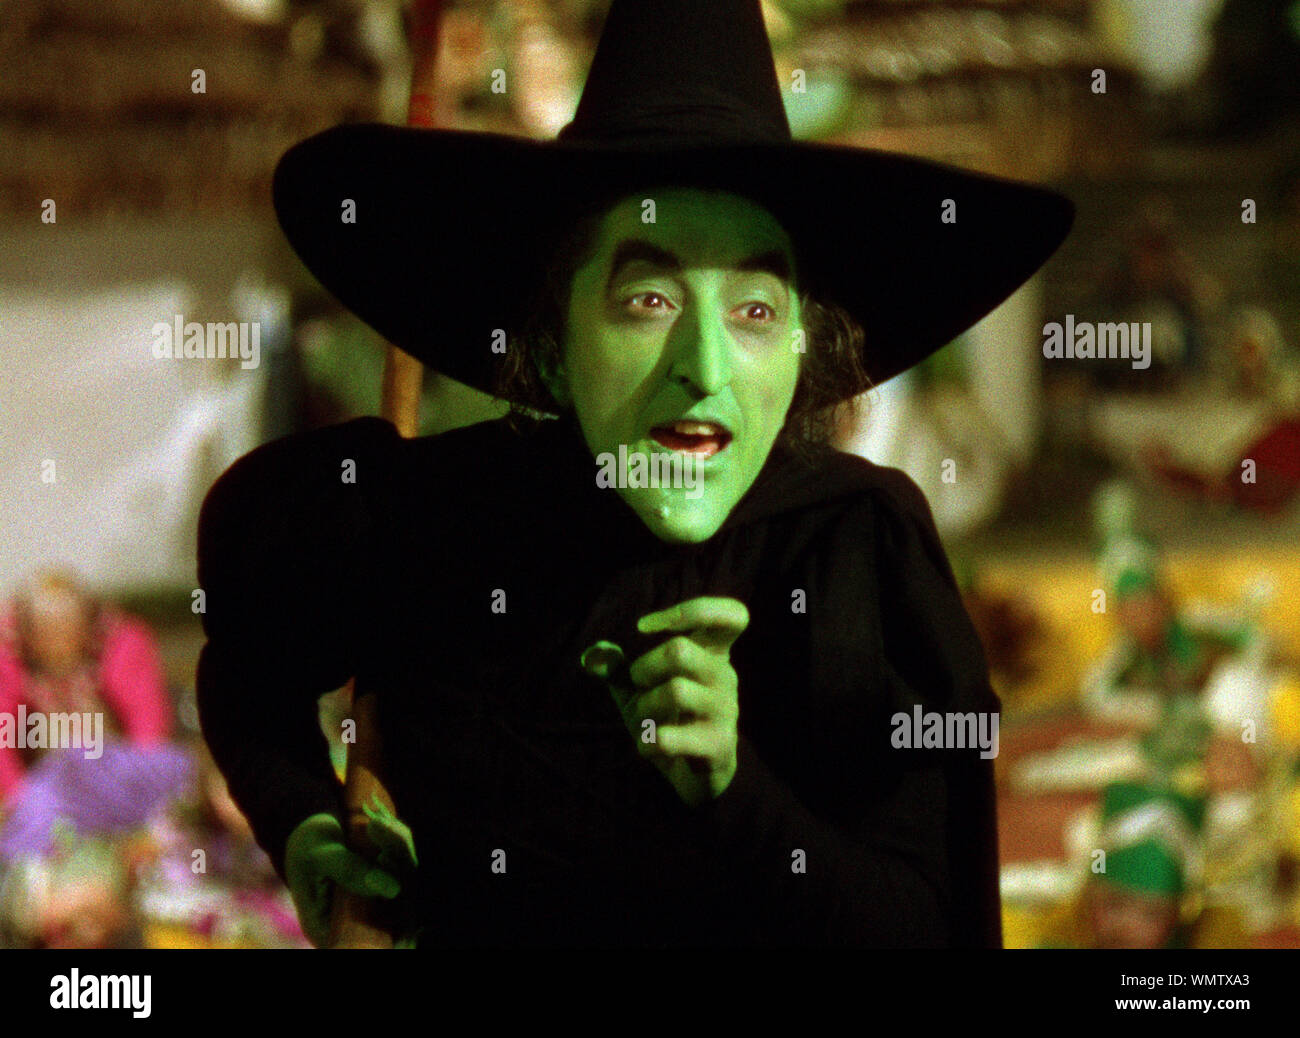 Margaret Hamilton as the Wicked Witch of the West, "The Wizard of Oz" (1939) MGM  File Reference # 33848-639THA Stock Photo